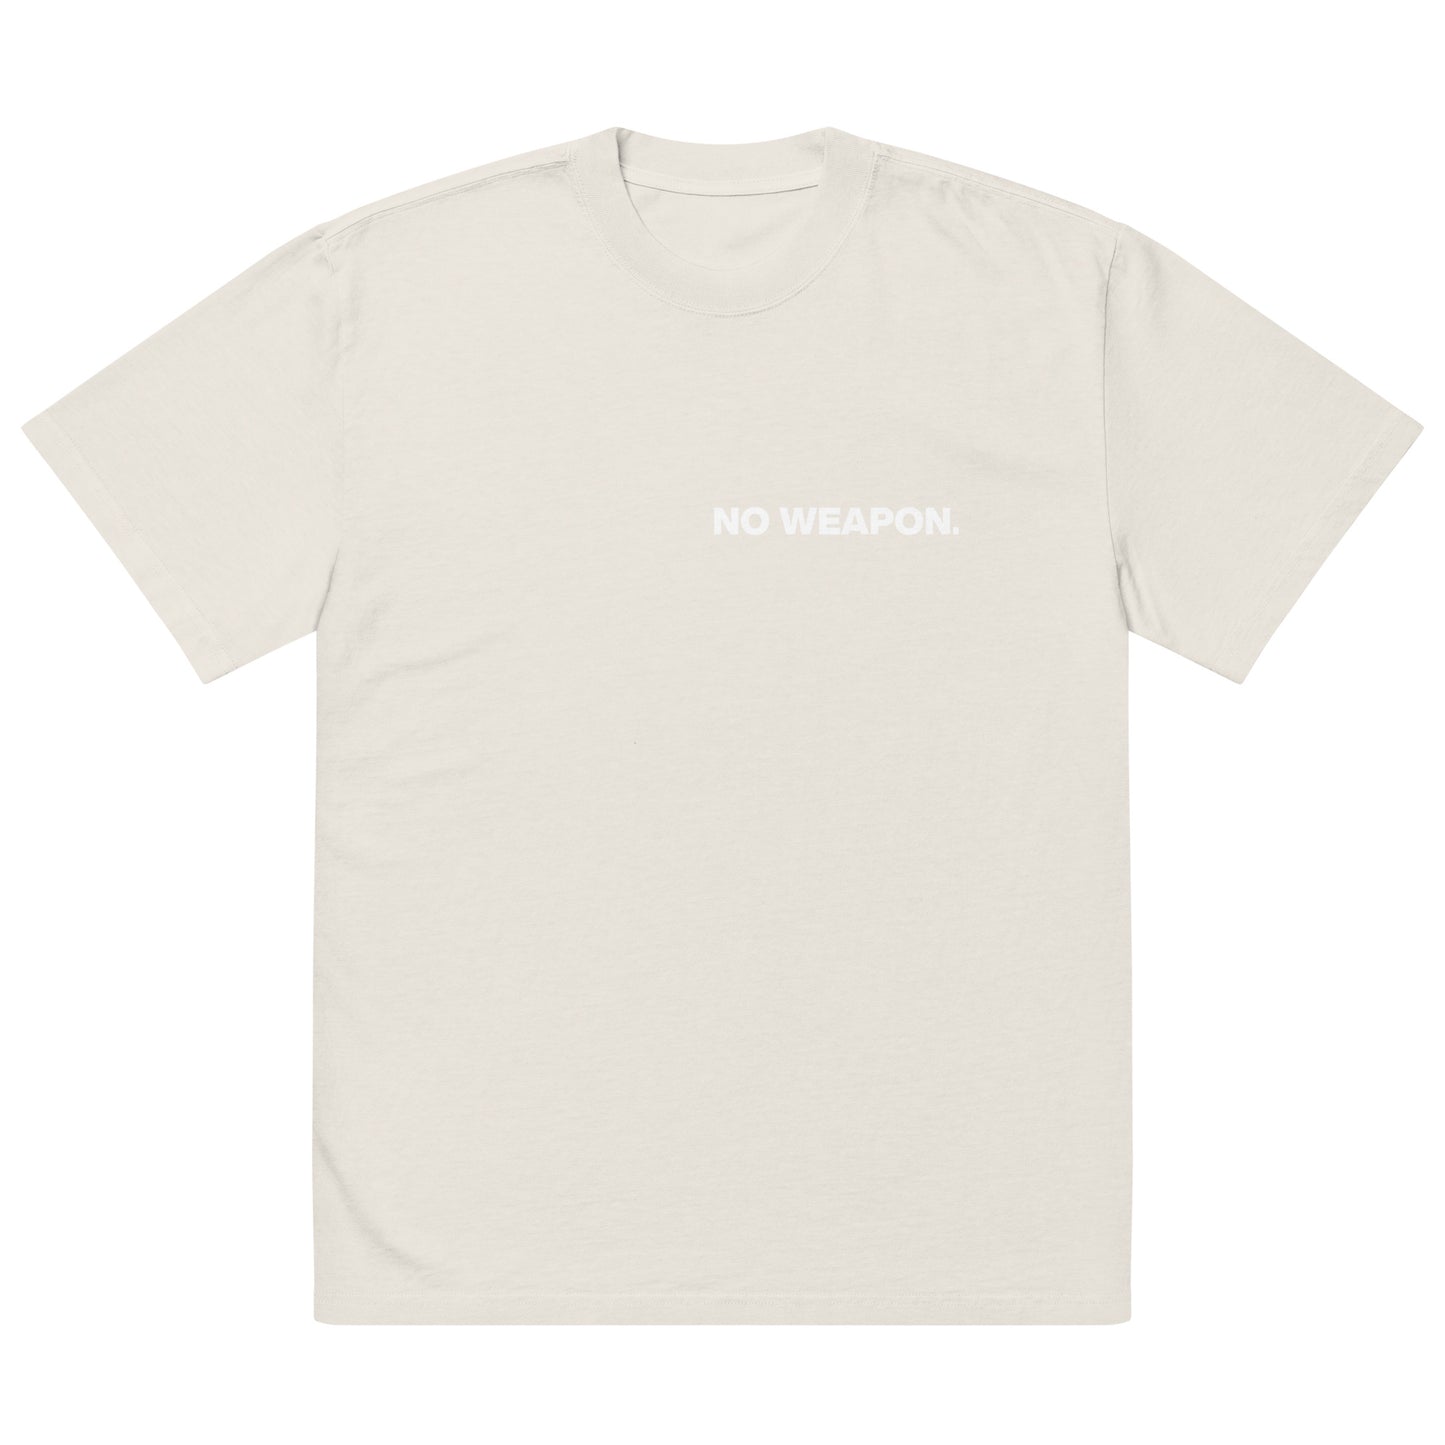 No Weapon Oversized Faded T-shirt